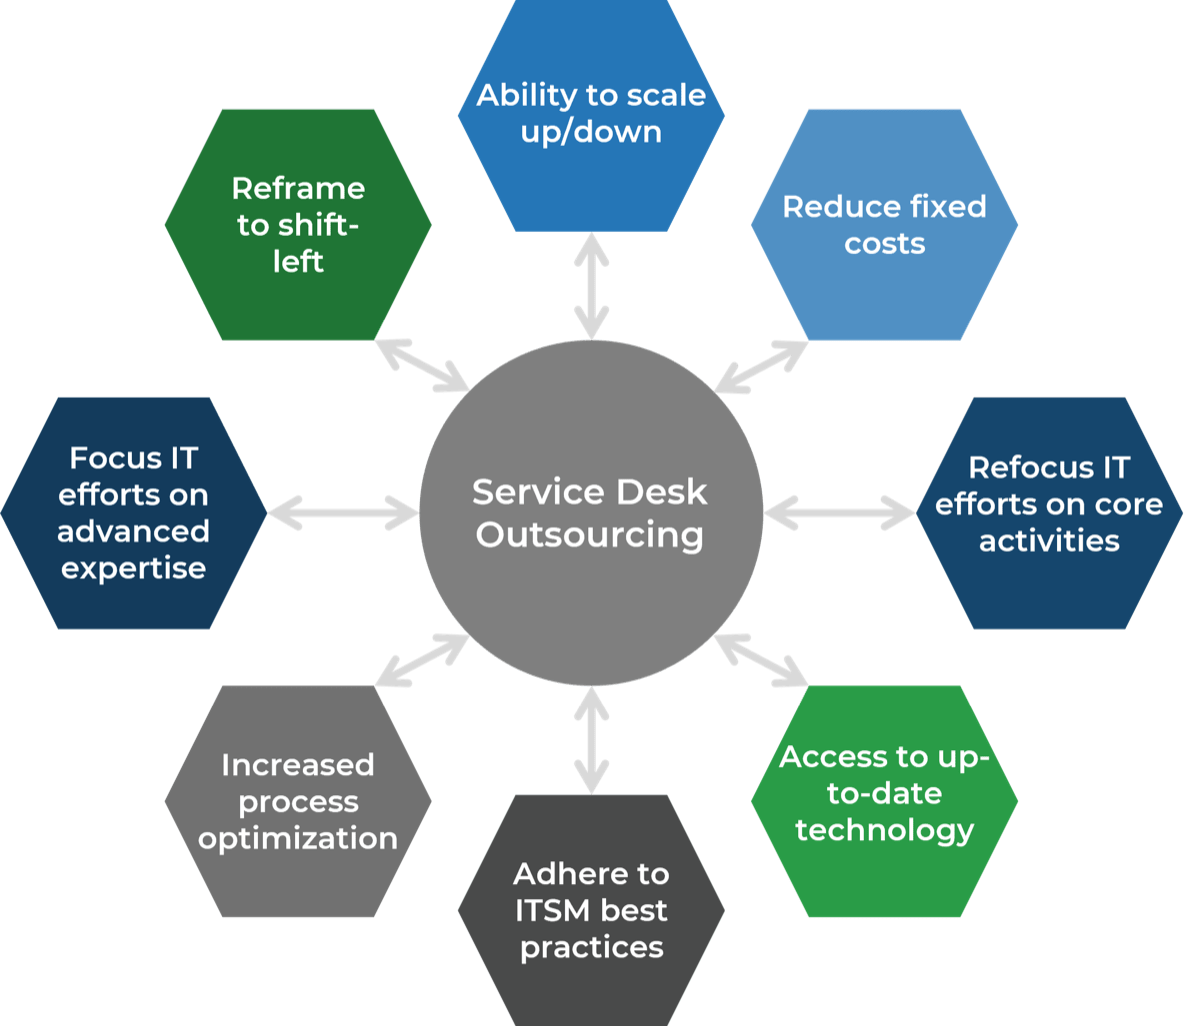 Service Desk Outsourcing: Ability to scale up/down; Reduce fixed costs; Refocus IT efforts on core activities; Access to up-to-date technology; Adhere to  ITSM best practices; Increased process optimization; Focus IT efforts on advanced expertise; Reframe to shift-left; 
